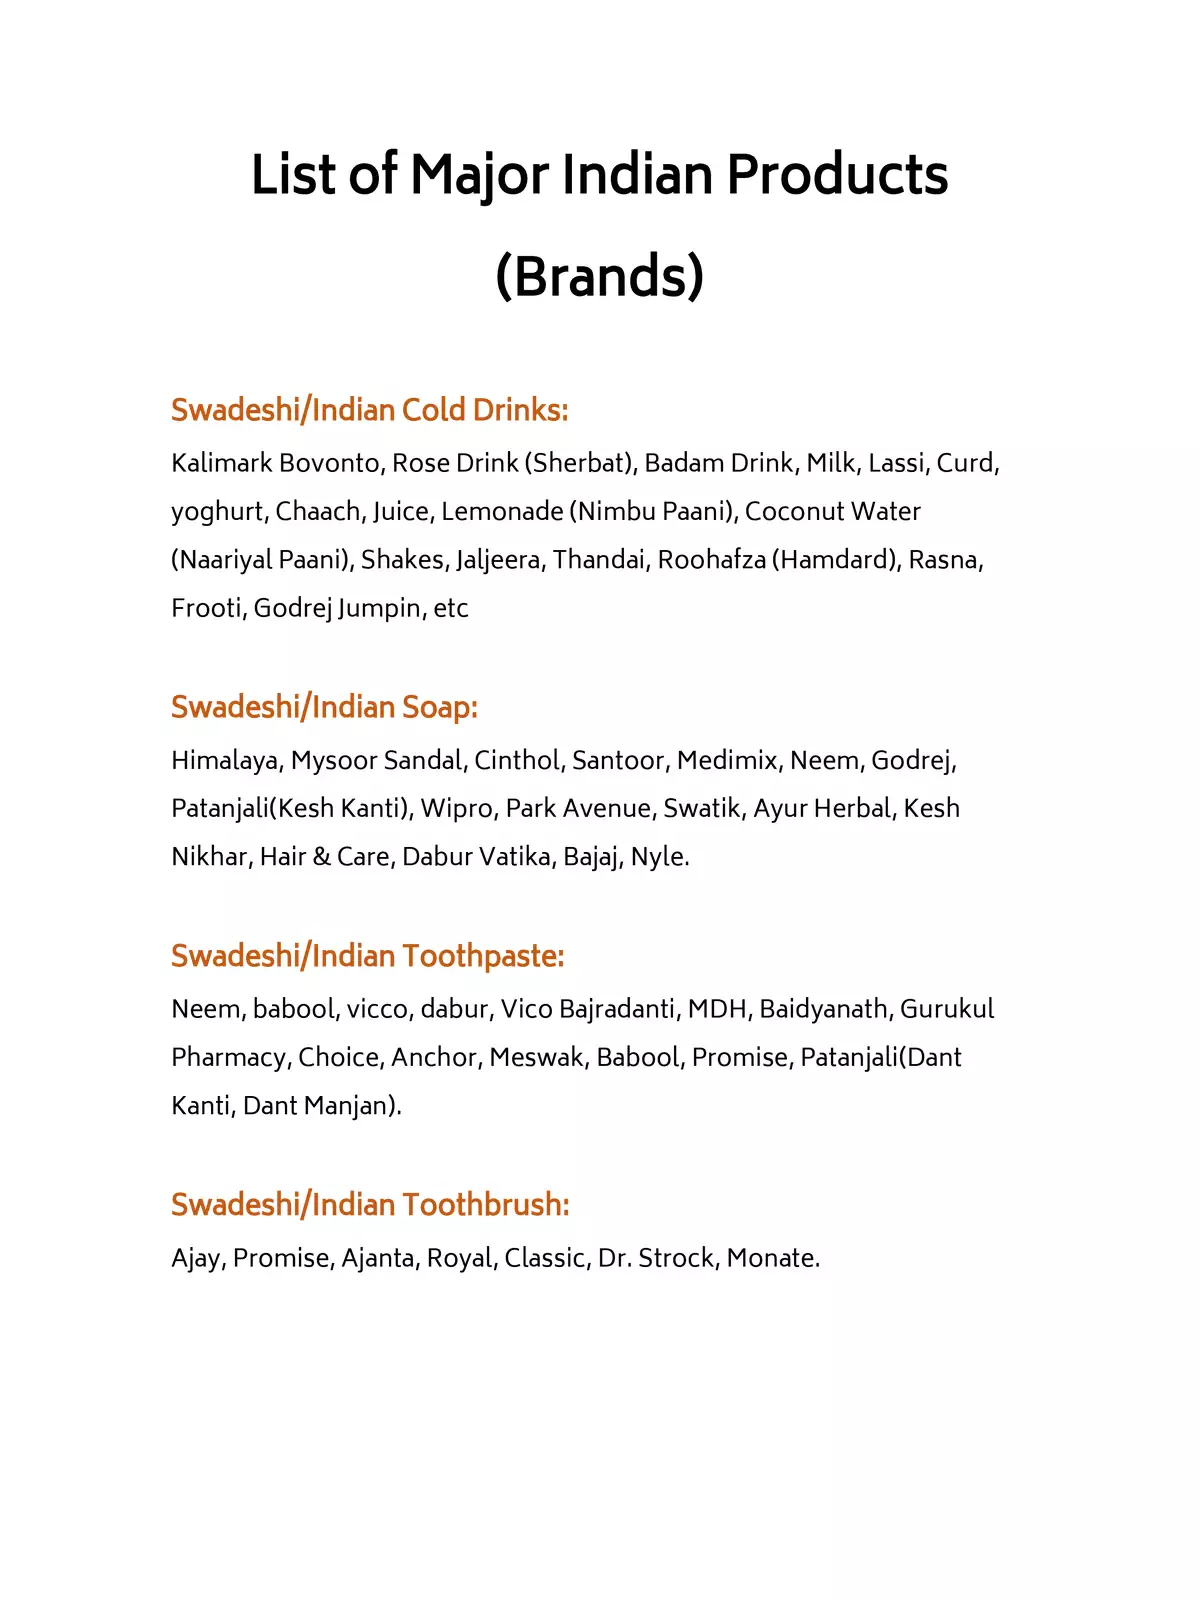 Indian/Swadeshi Products List